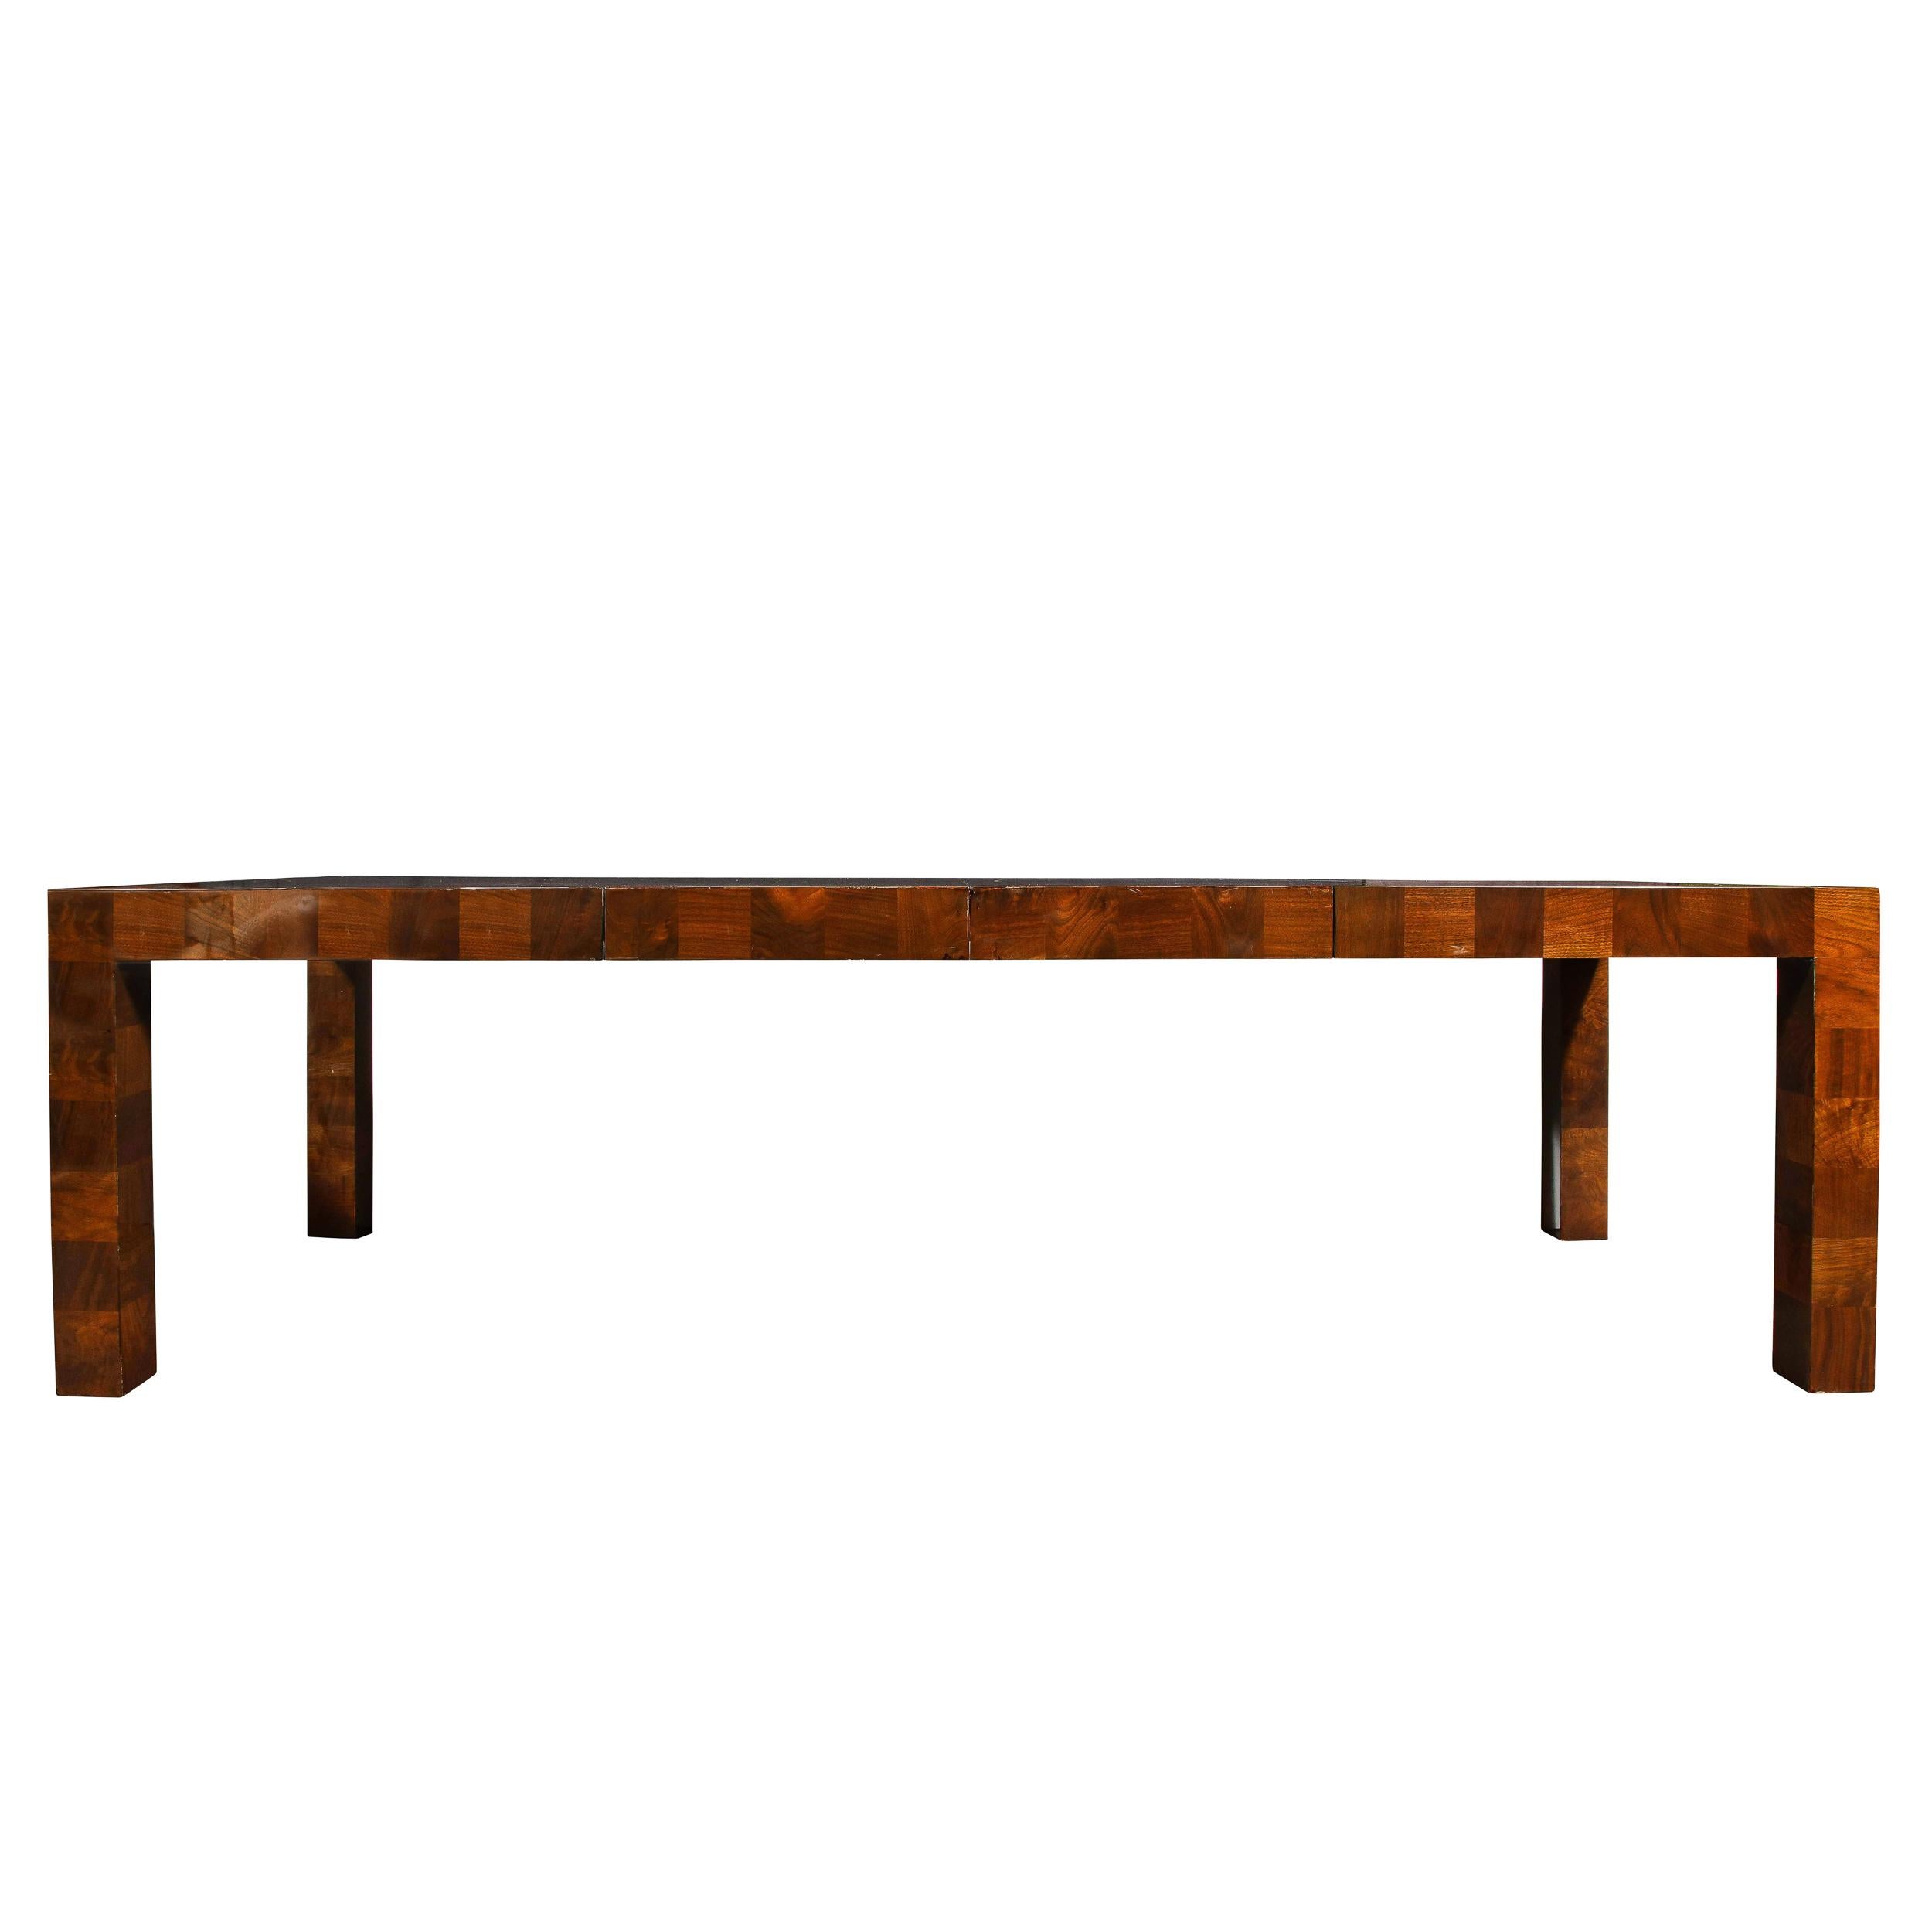 This gorgeous Mid Century Modern parsons style dining table was realized in the United States circa 1970. It features a rectilinear body features volumetric rectangular legs and a rectangular top in a parquetry mosaic of square tessellated burled